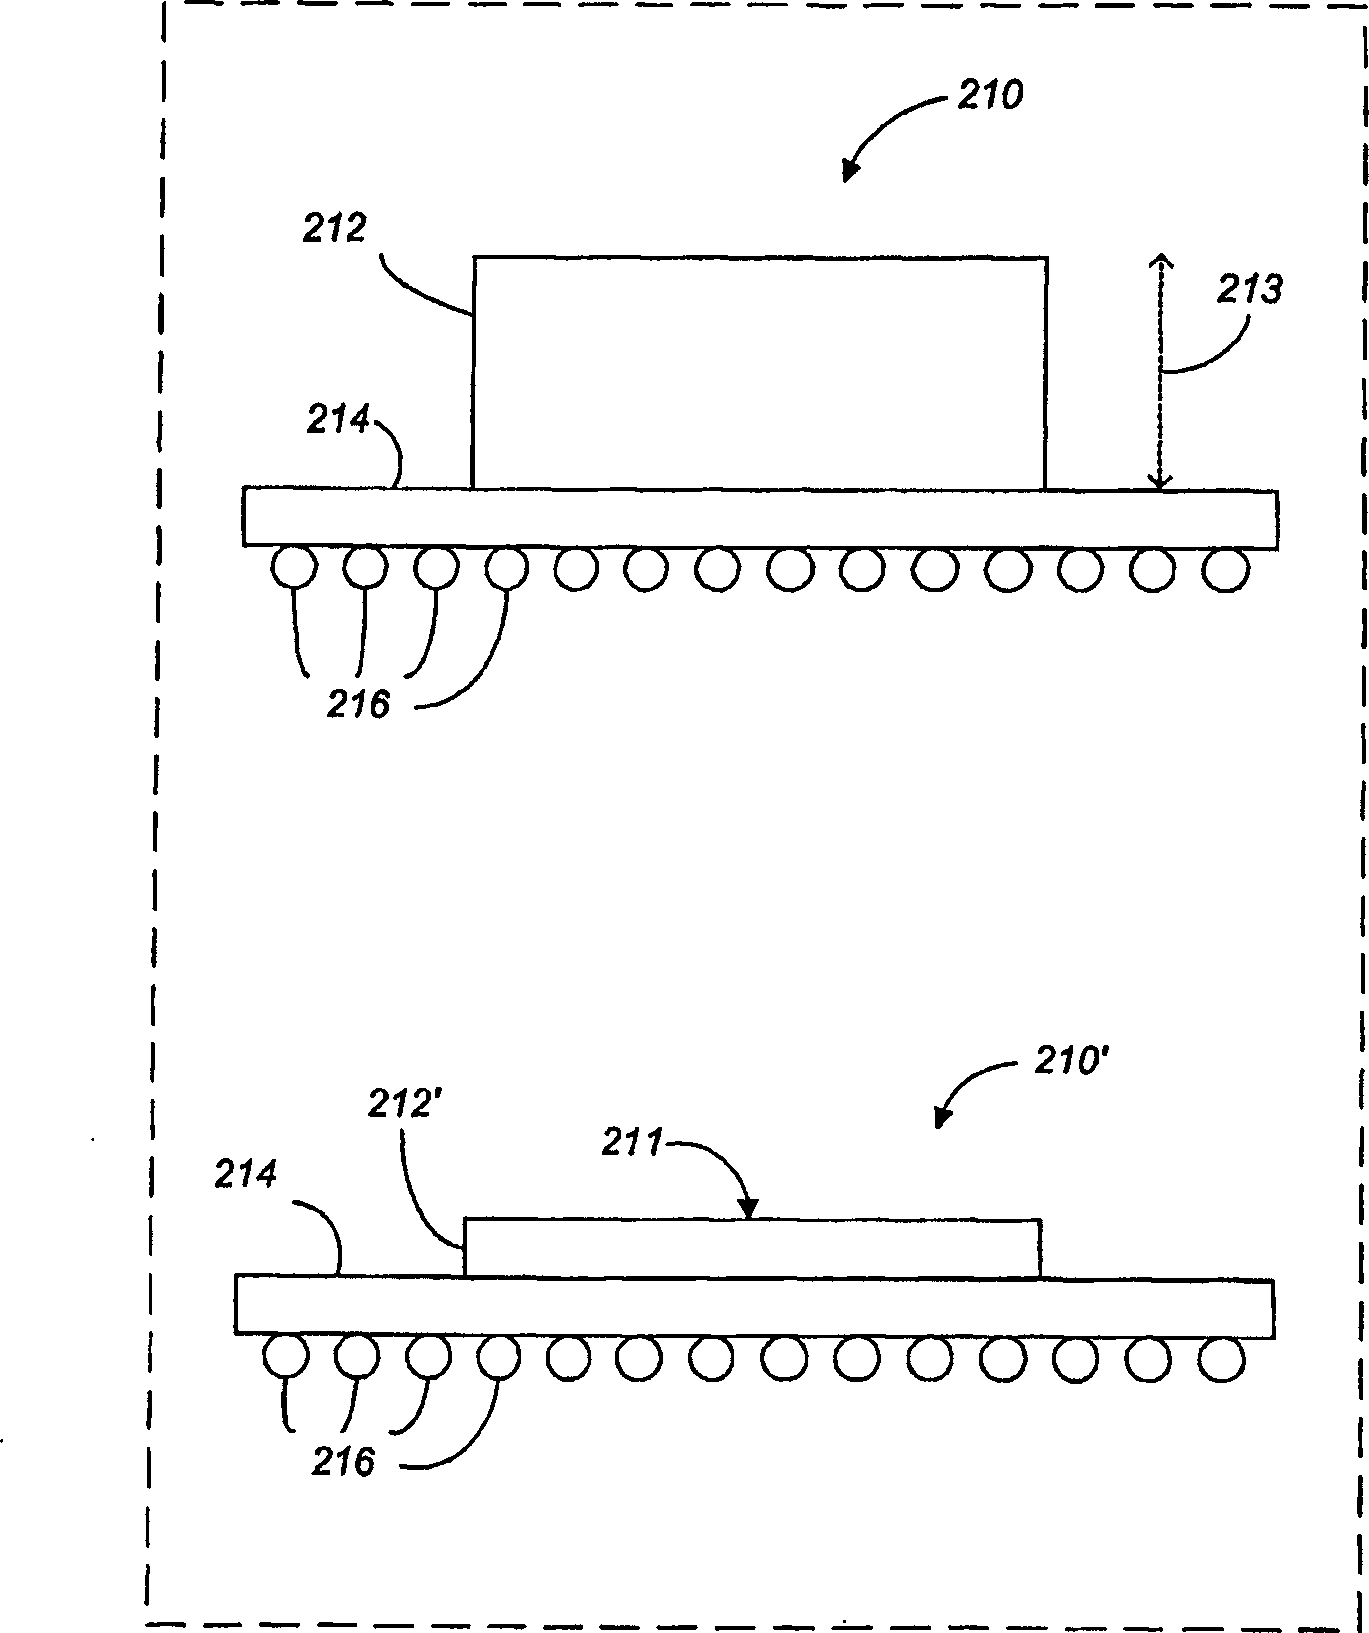 Measuring back-side voltage of an integrated circuit